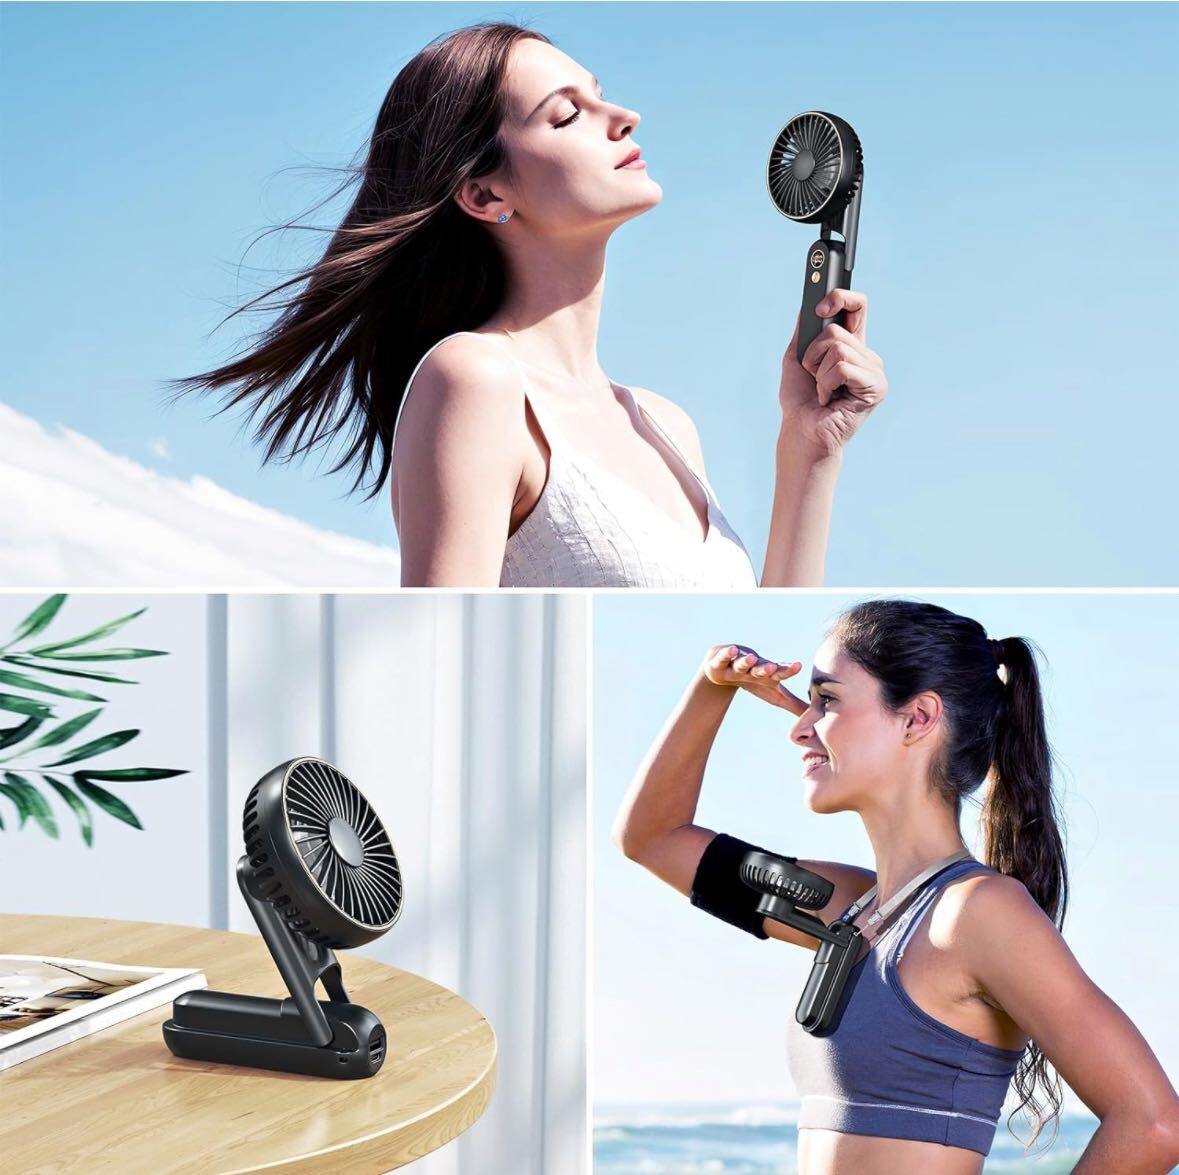  handy fan handy electric fan in stock electric fan 20dB quiet sound mobile electric fan 3000mAh battery built-in maximum 24 hour continuation use 5 -step air flow adjustment black 